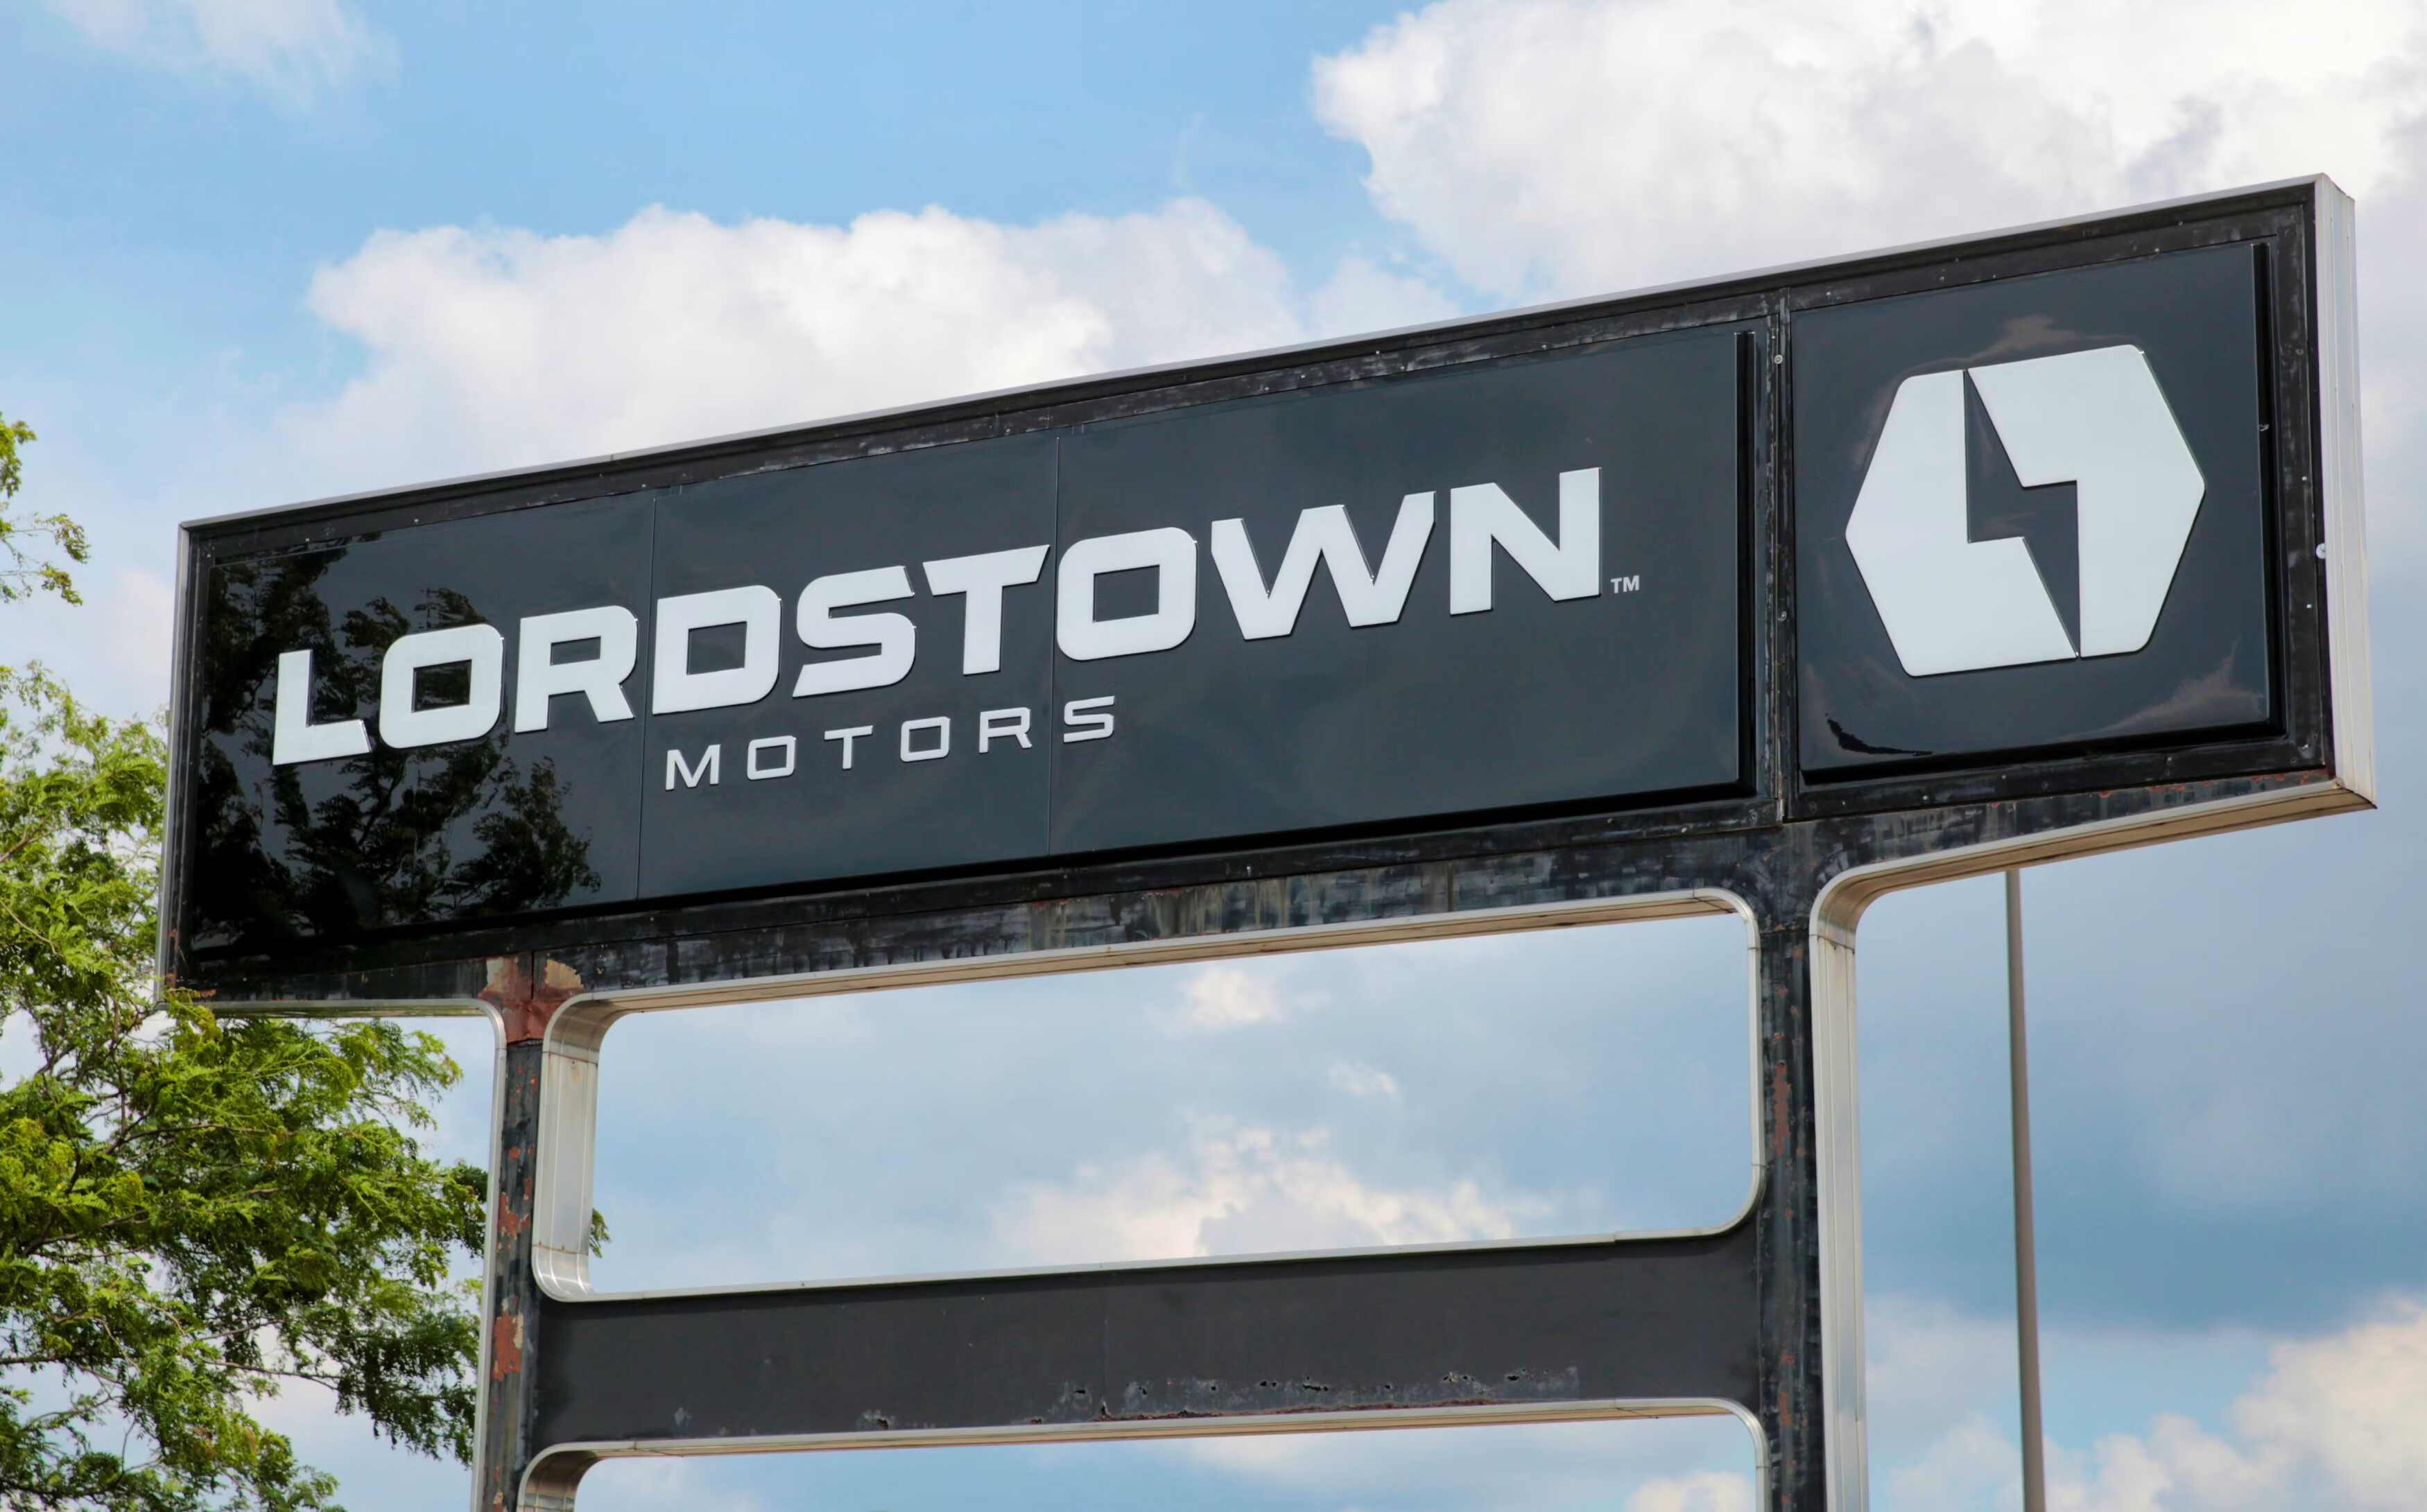 Lordstown Motors Misled Investors About EV Pickup Sales Potential, SEC Charges